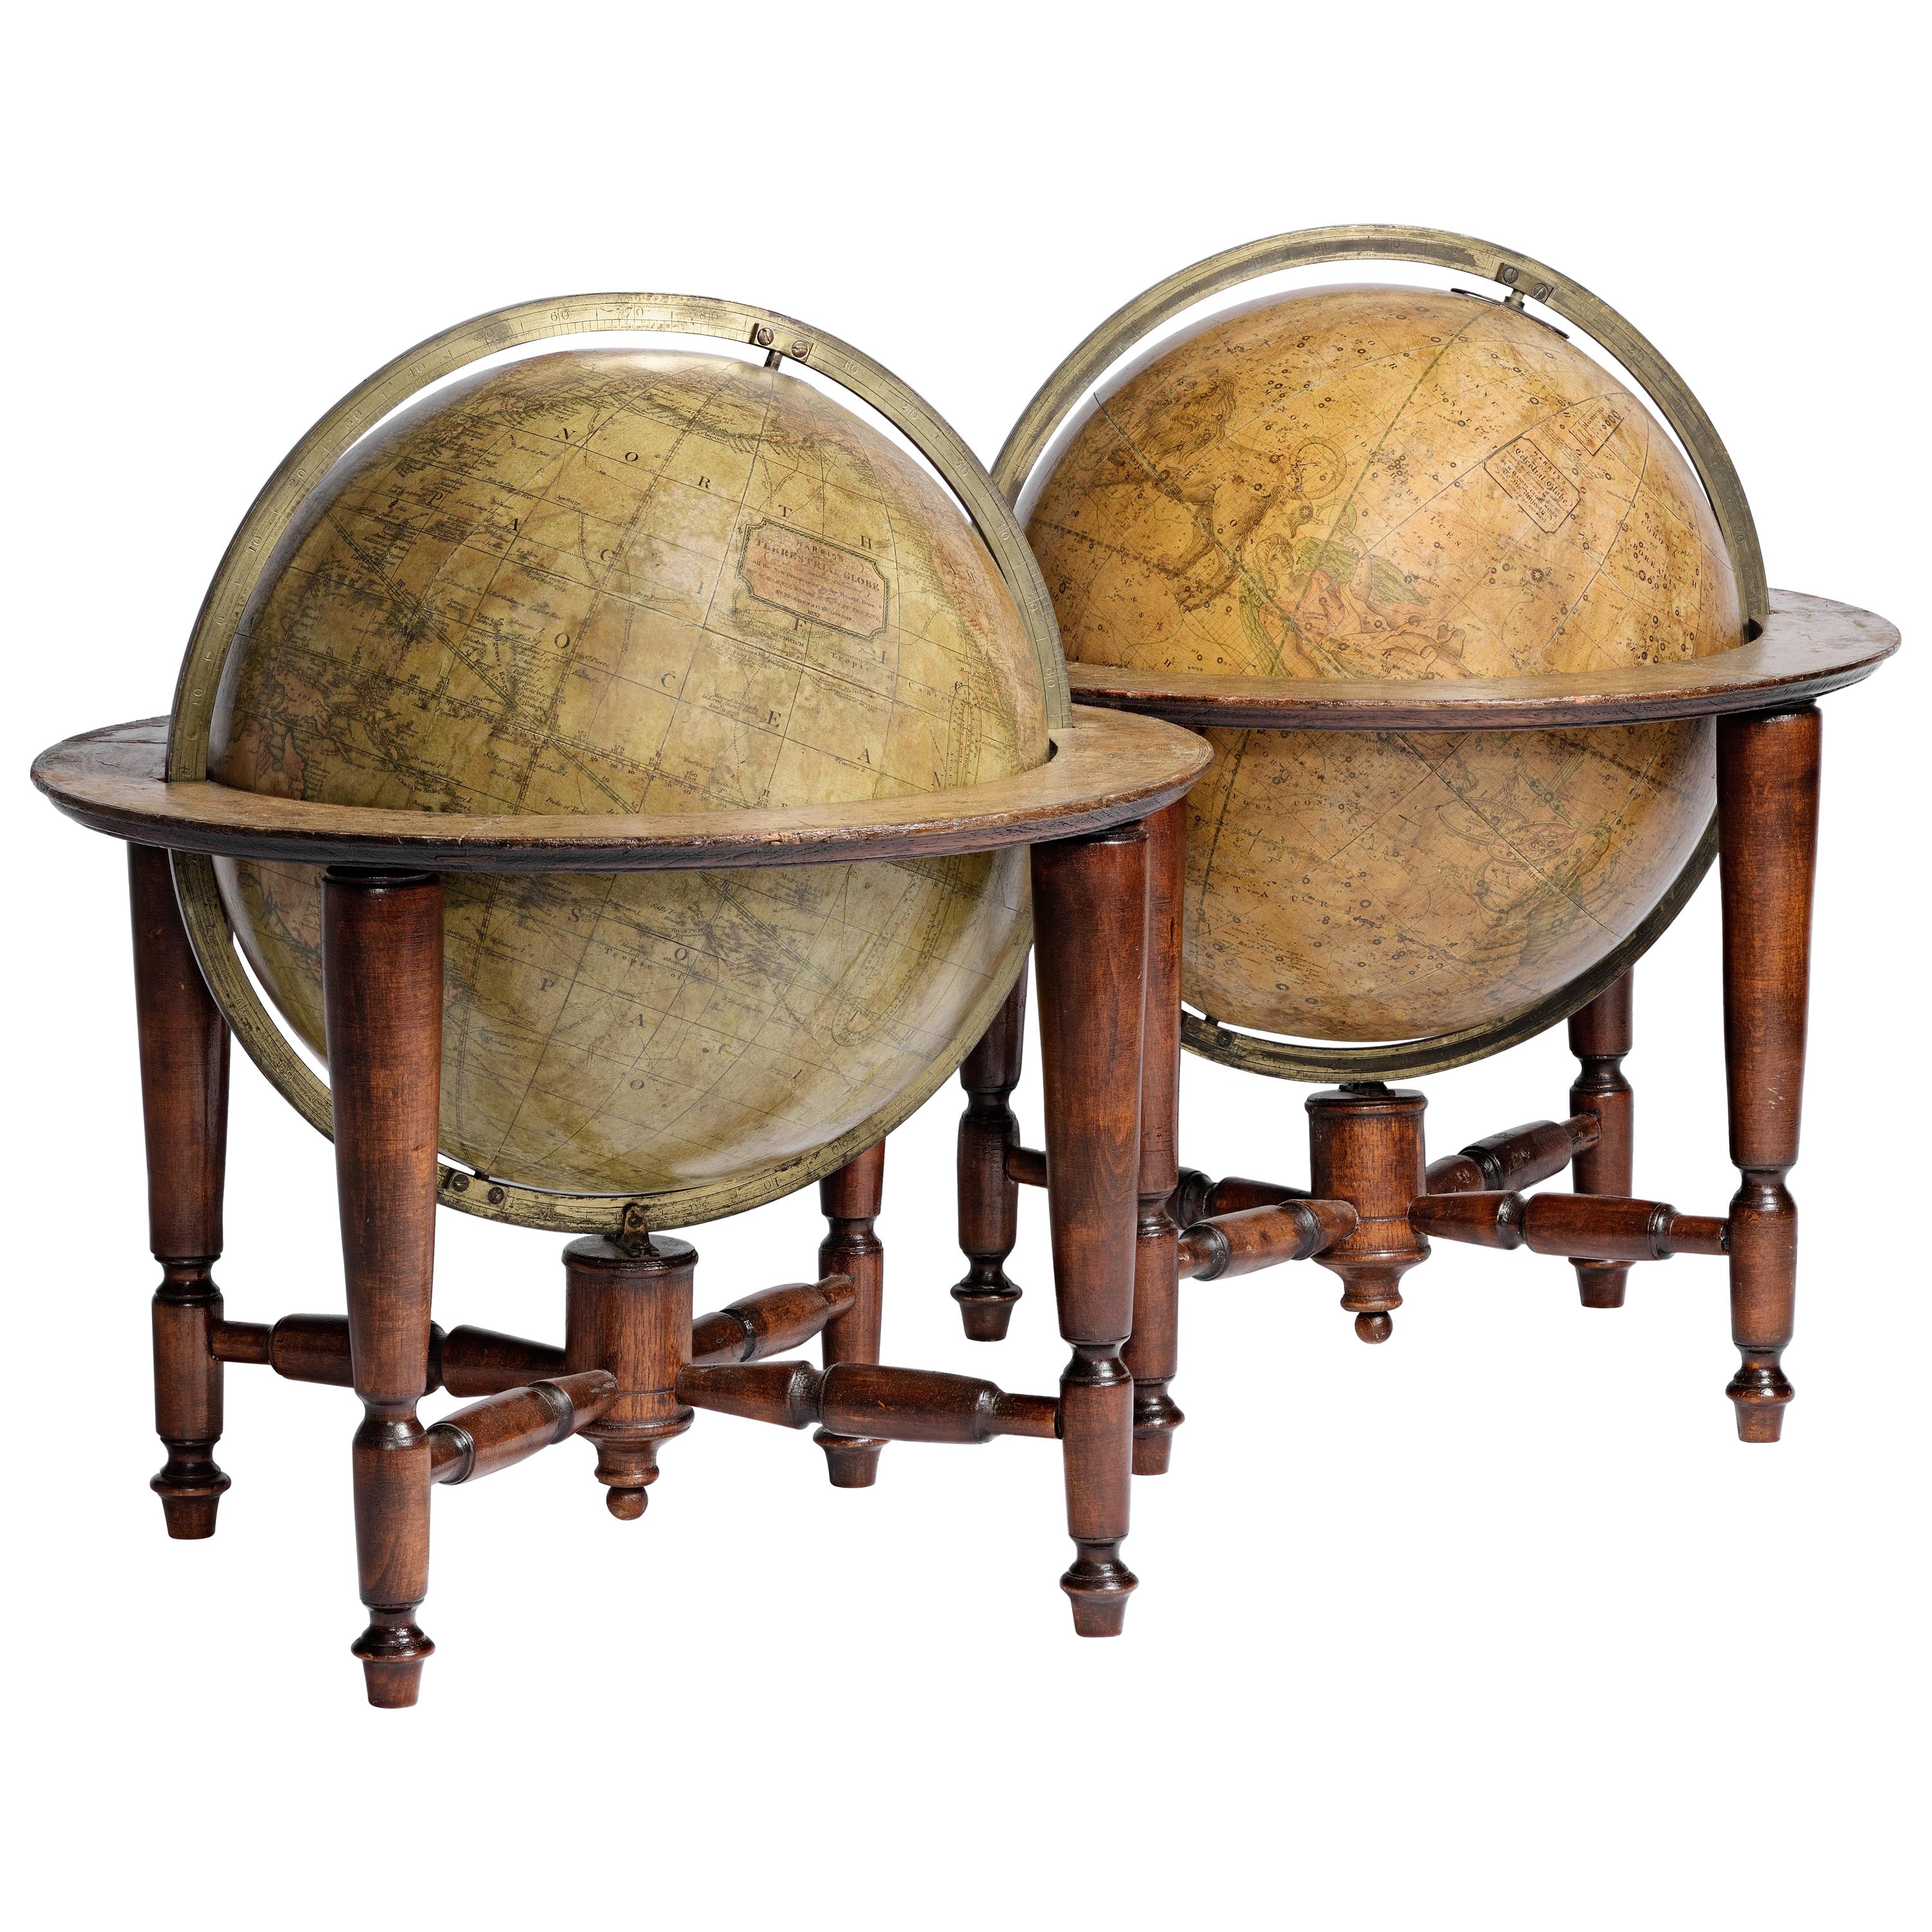 Pair of English 12-inch Globes by William Harris, London, 1832 and 1835